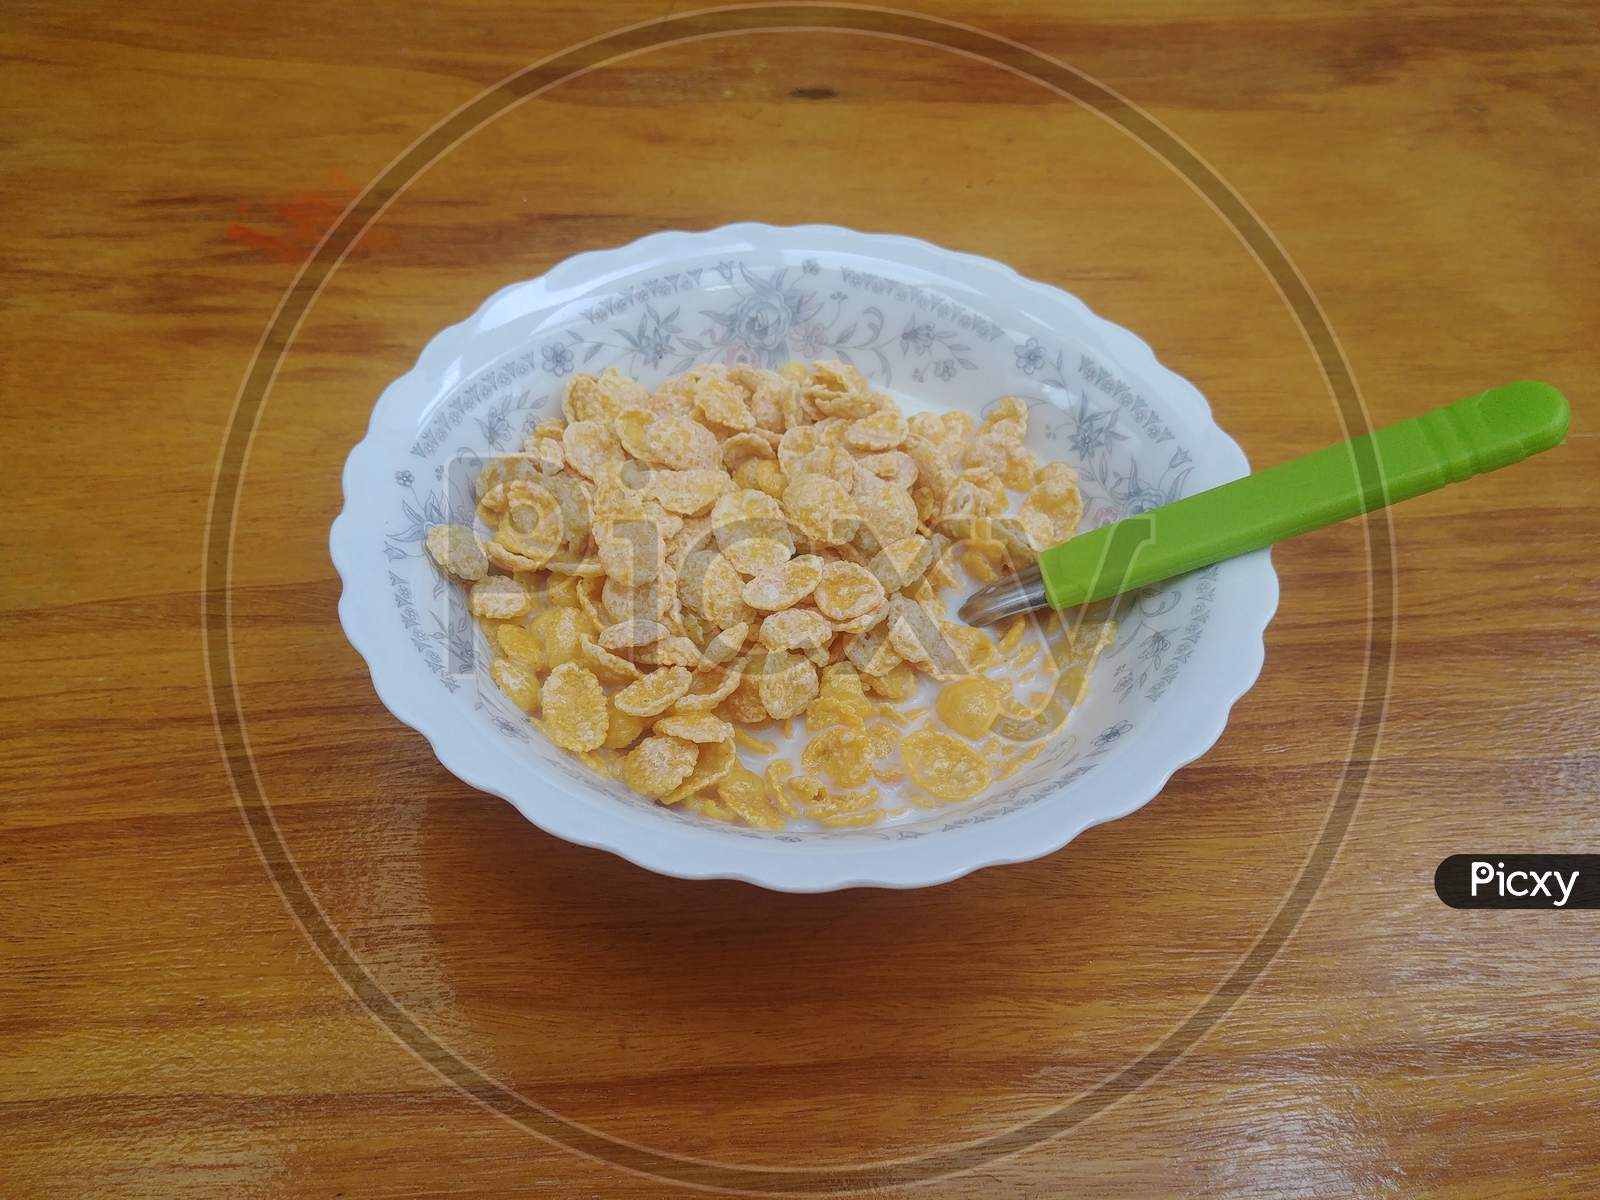 Breakfast with a cereal bowl with milk and a green spoon on the wooden table